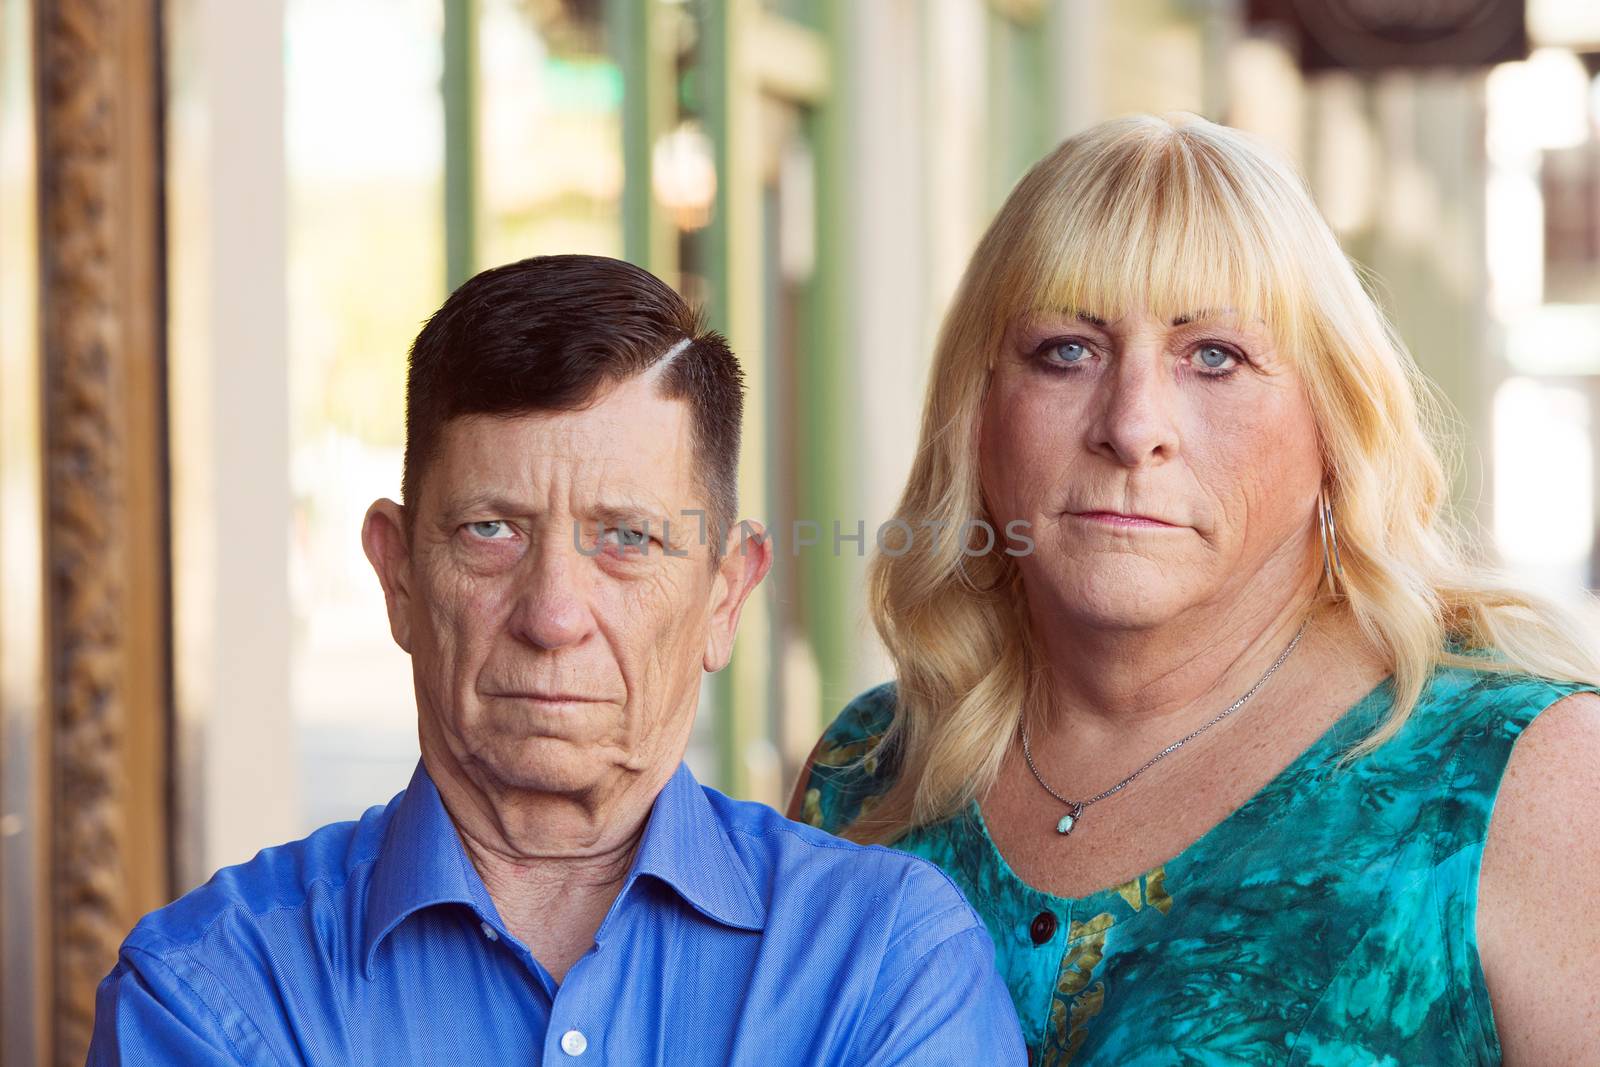 Serious transgender couple standing together by Creatista